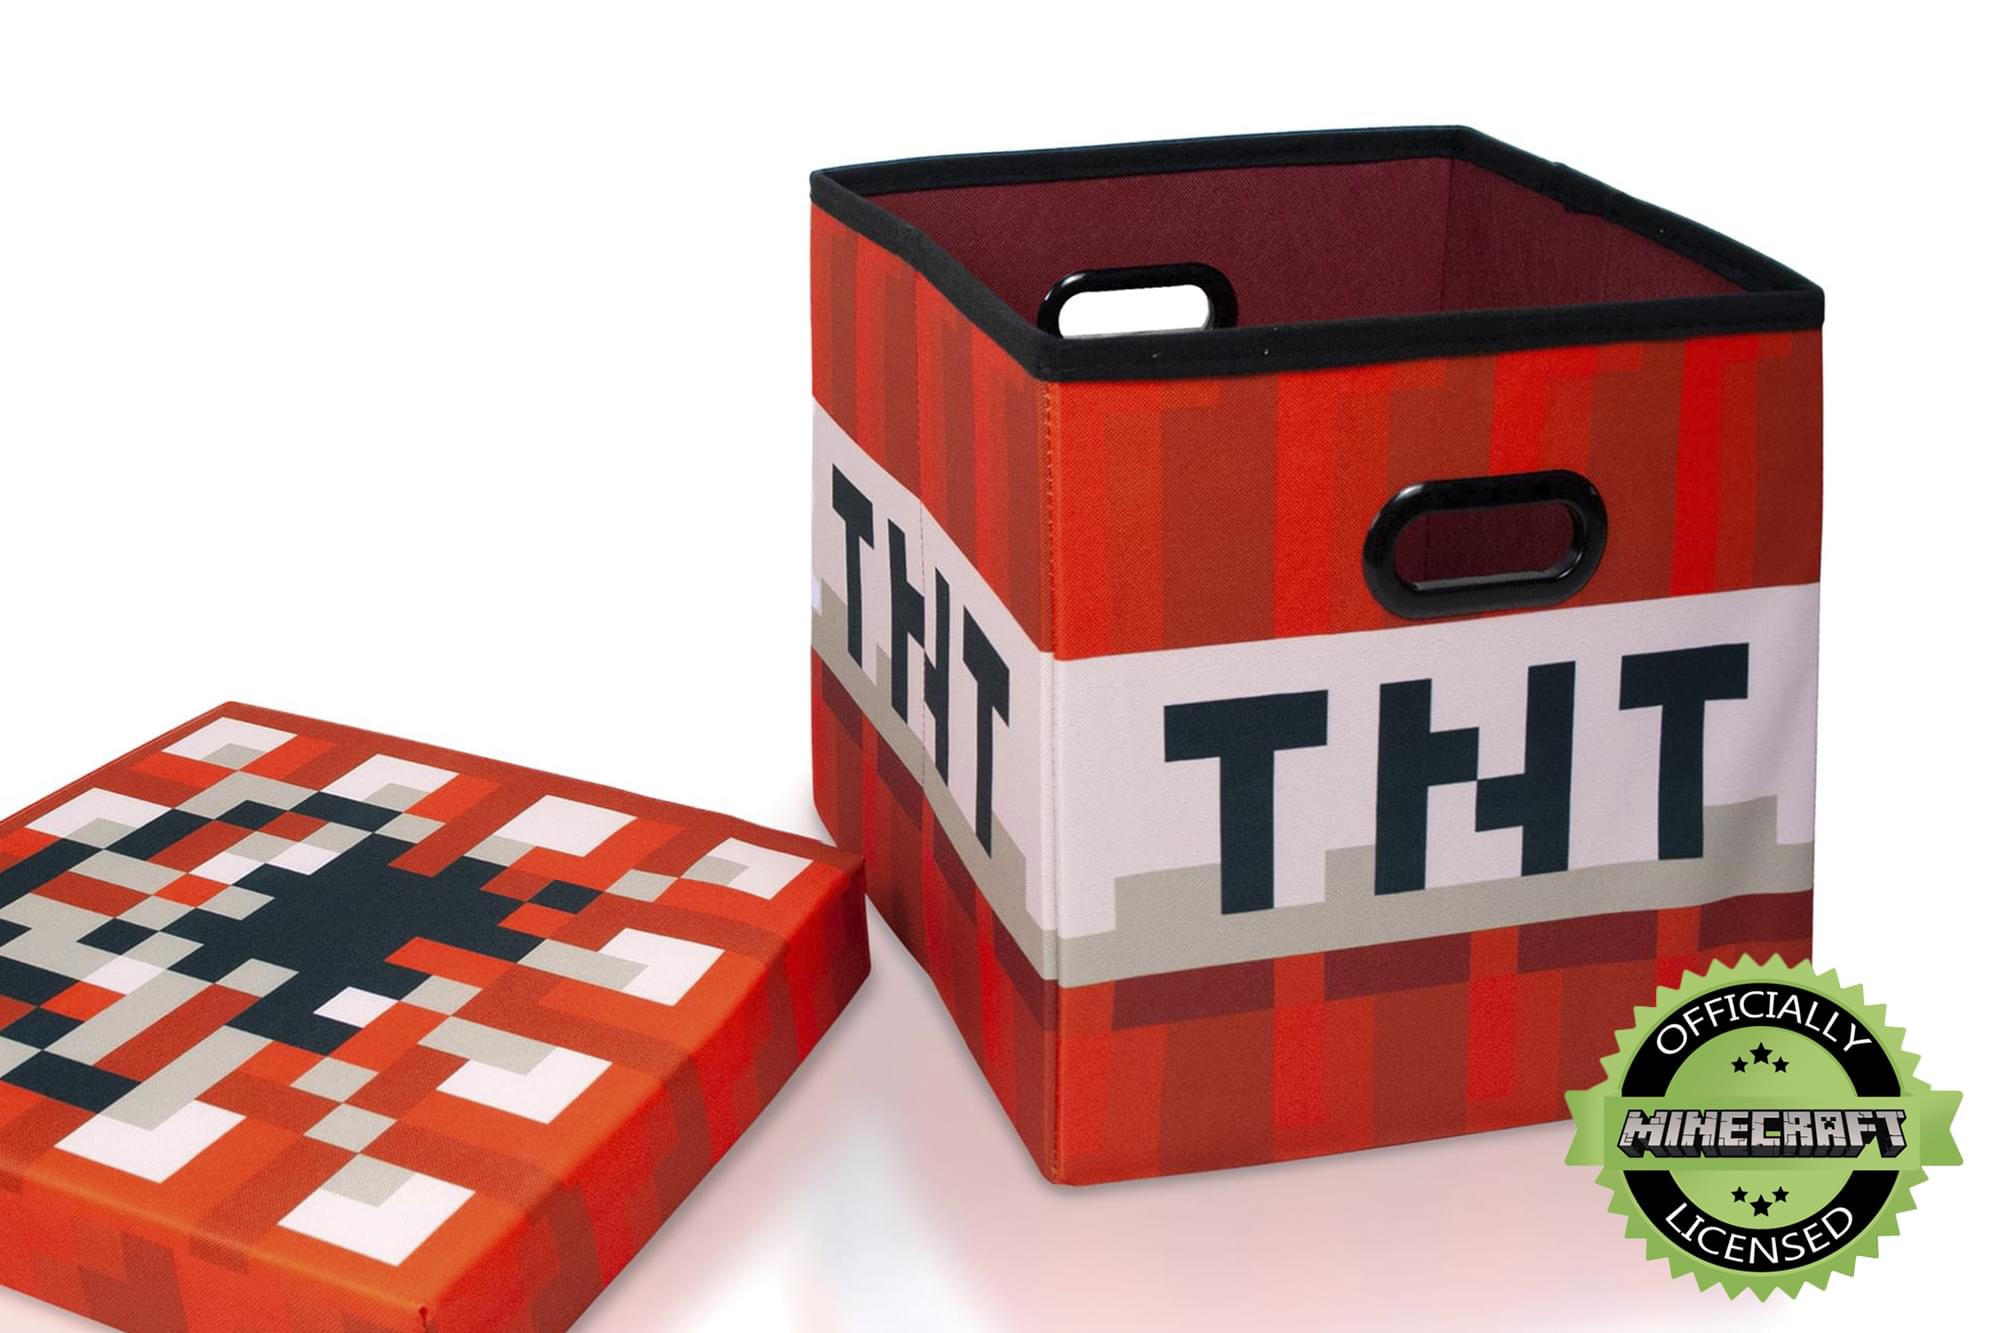 Minecraft Tnt Block 15 Inch Storage Cube With Lid Free Shipping Toynk Toys